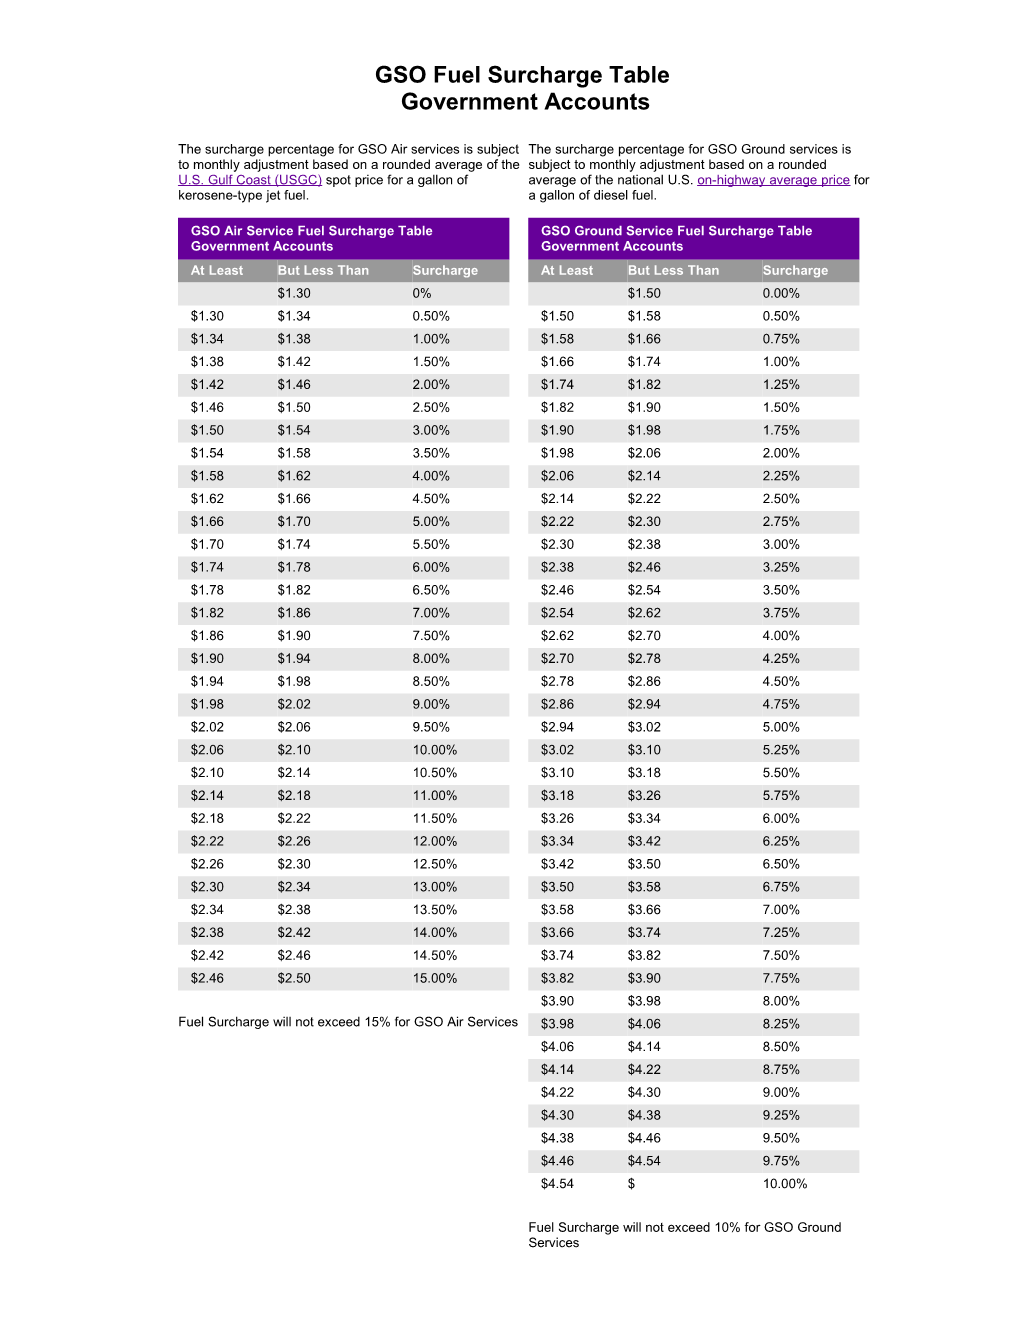 Fuel Surcharge Tables